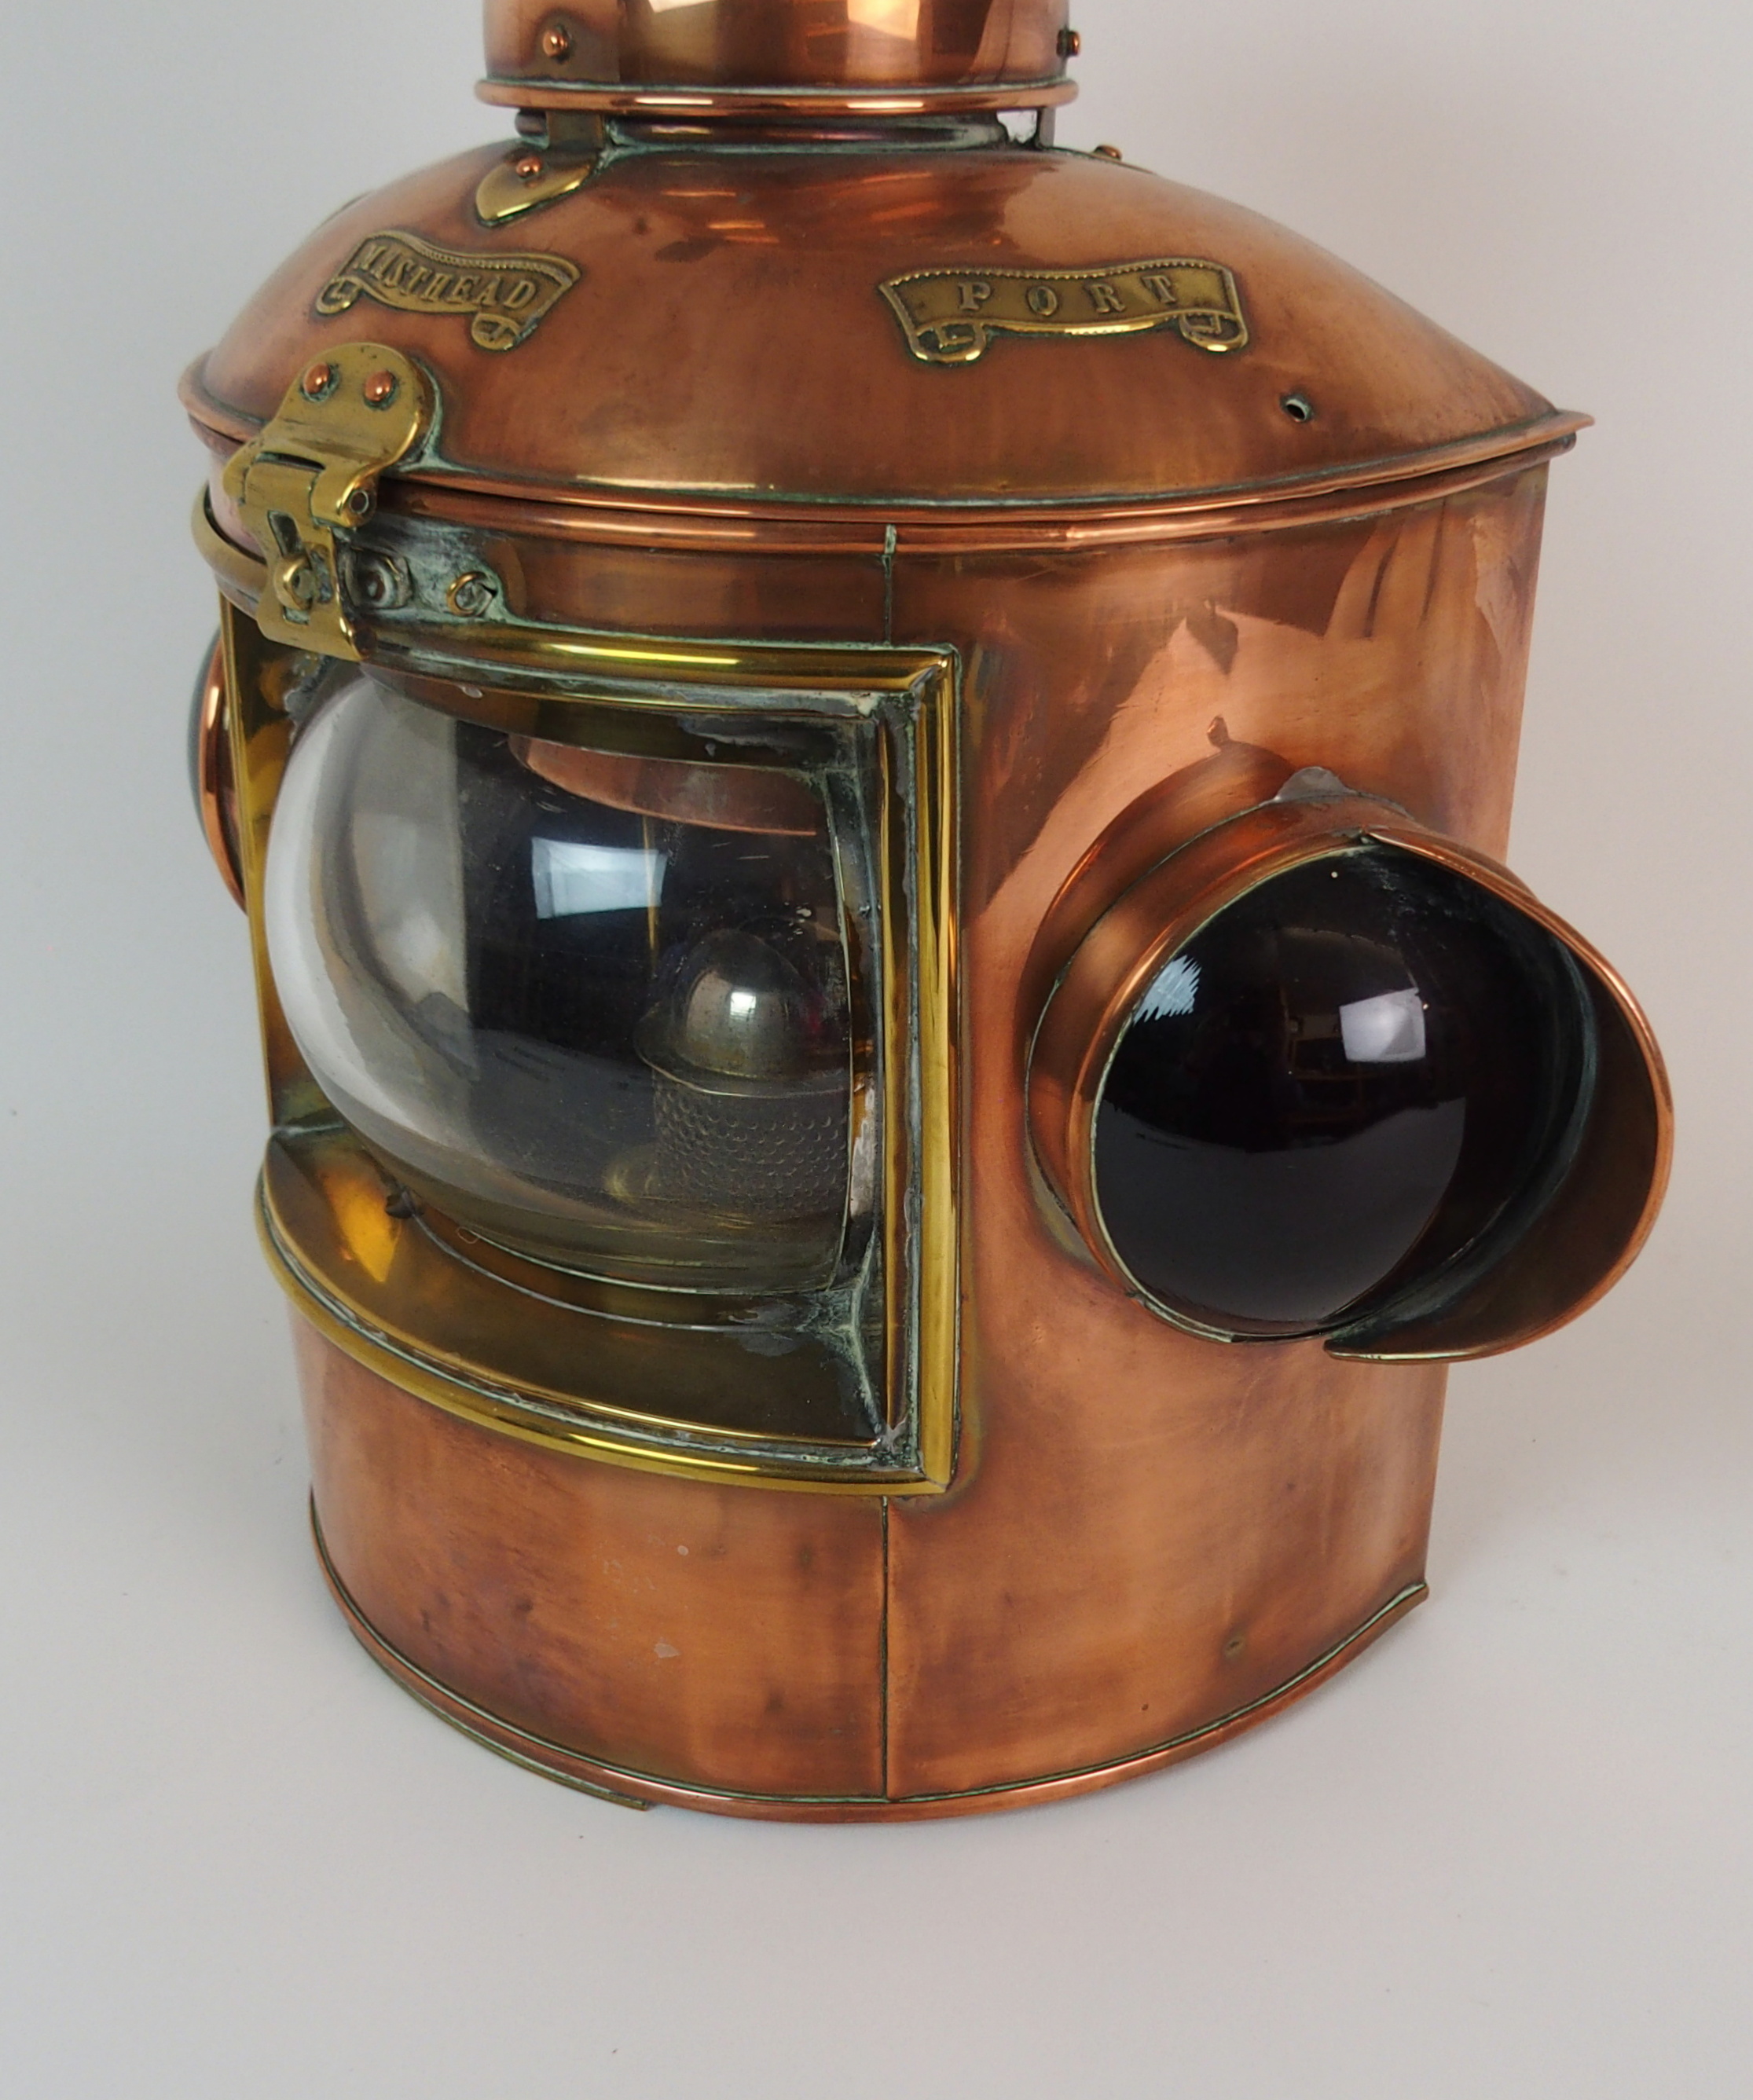 A VICTORIAN COPPER PORT & STARBOARD SHIPS LANTERN with hinged top and swing handle, with interior - Image 5 of 10